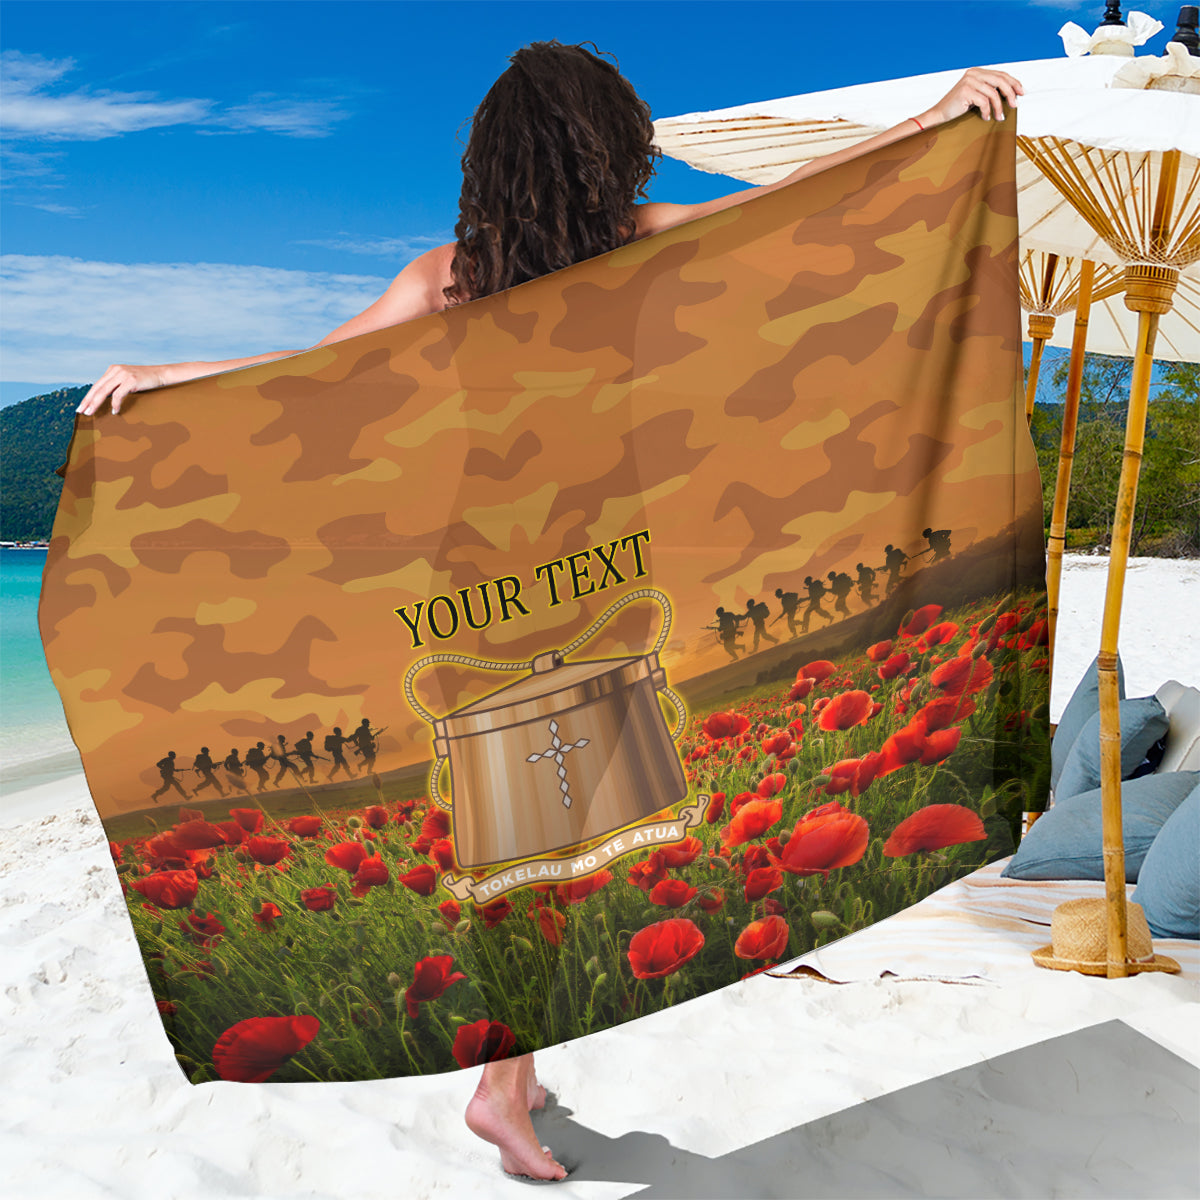 Tokelau ANZAC Day Personalised Sarong with Poppy Field LT9 One Size 44 x 66 inches Art - Polynesian Pride